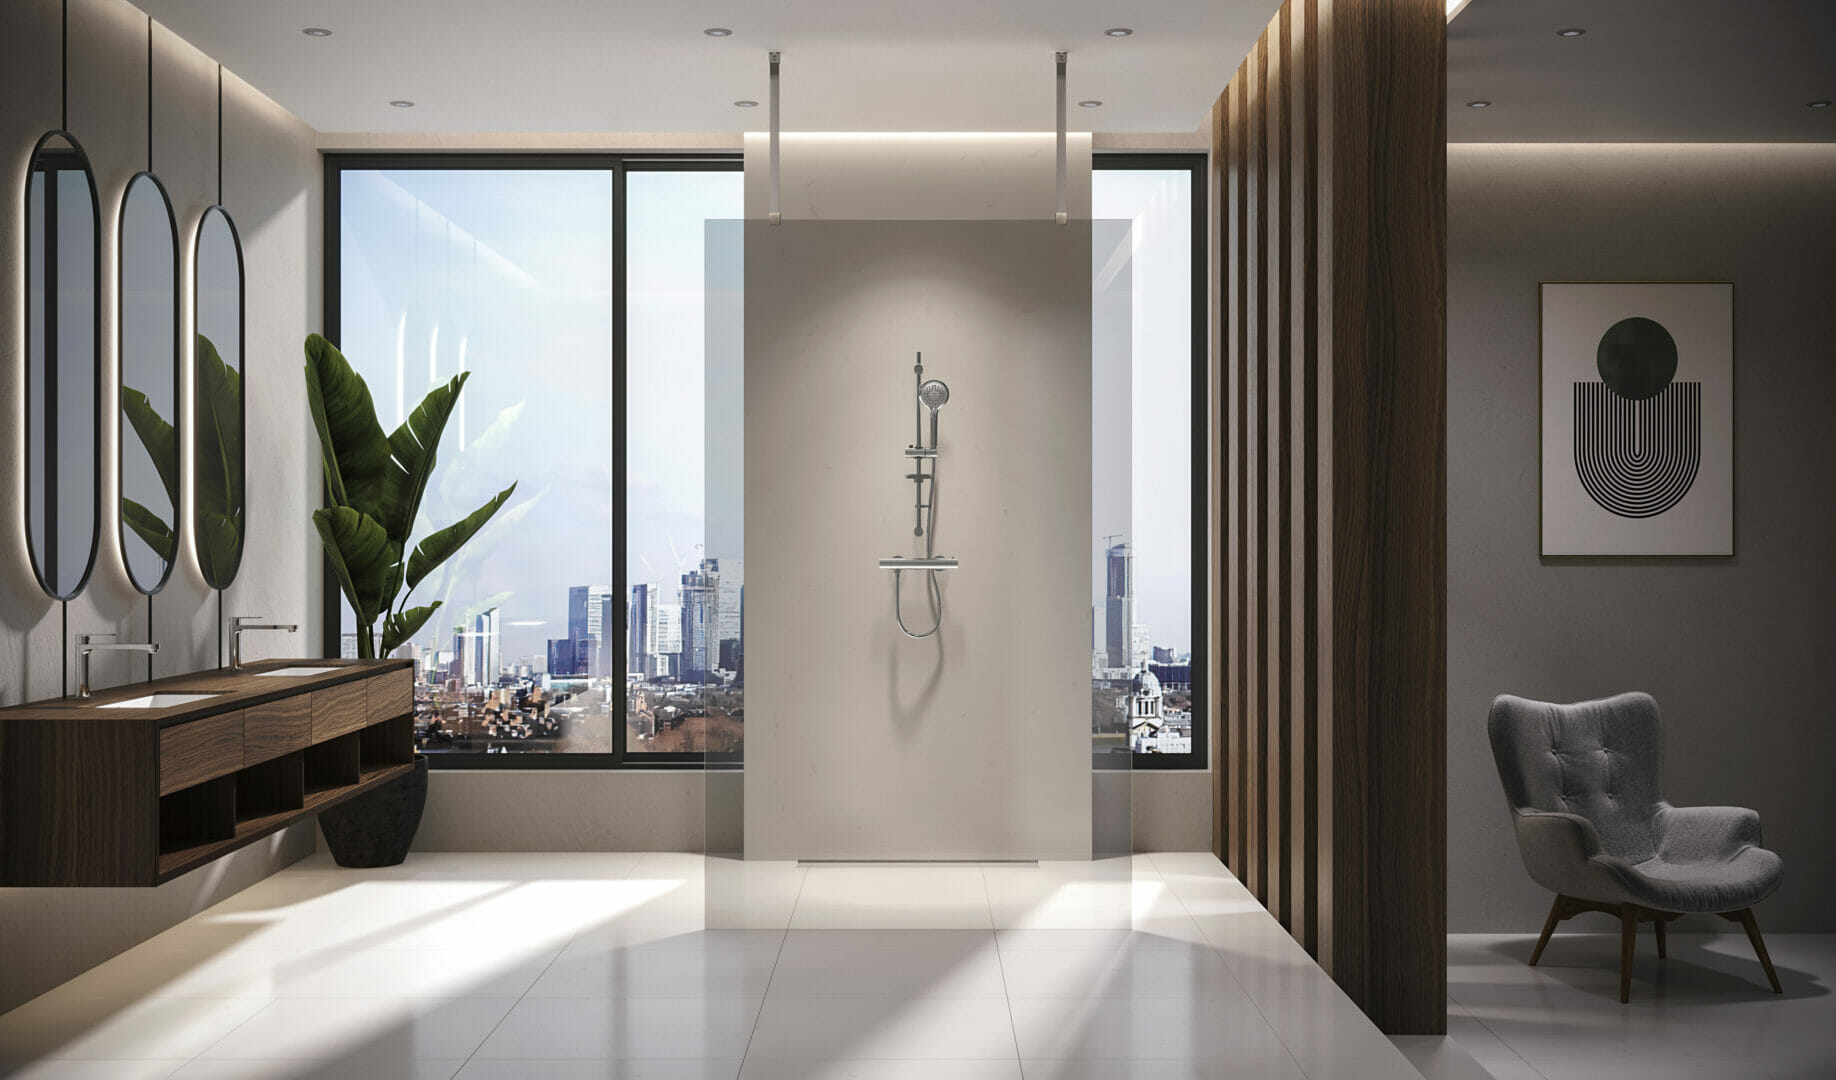 Aqualisa extends Mian mixer shower series designed for hotel and hospitality sectors